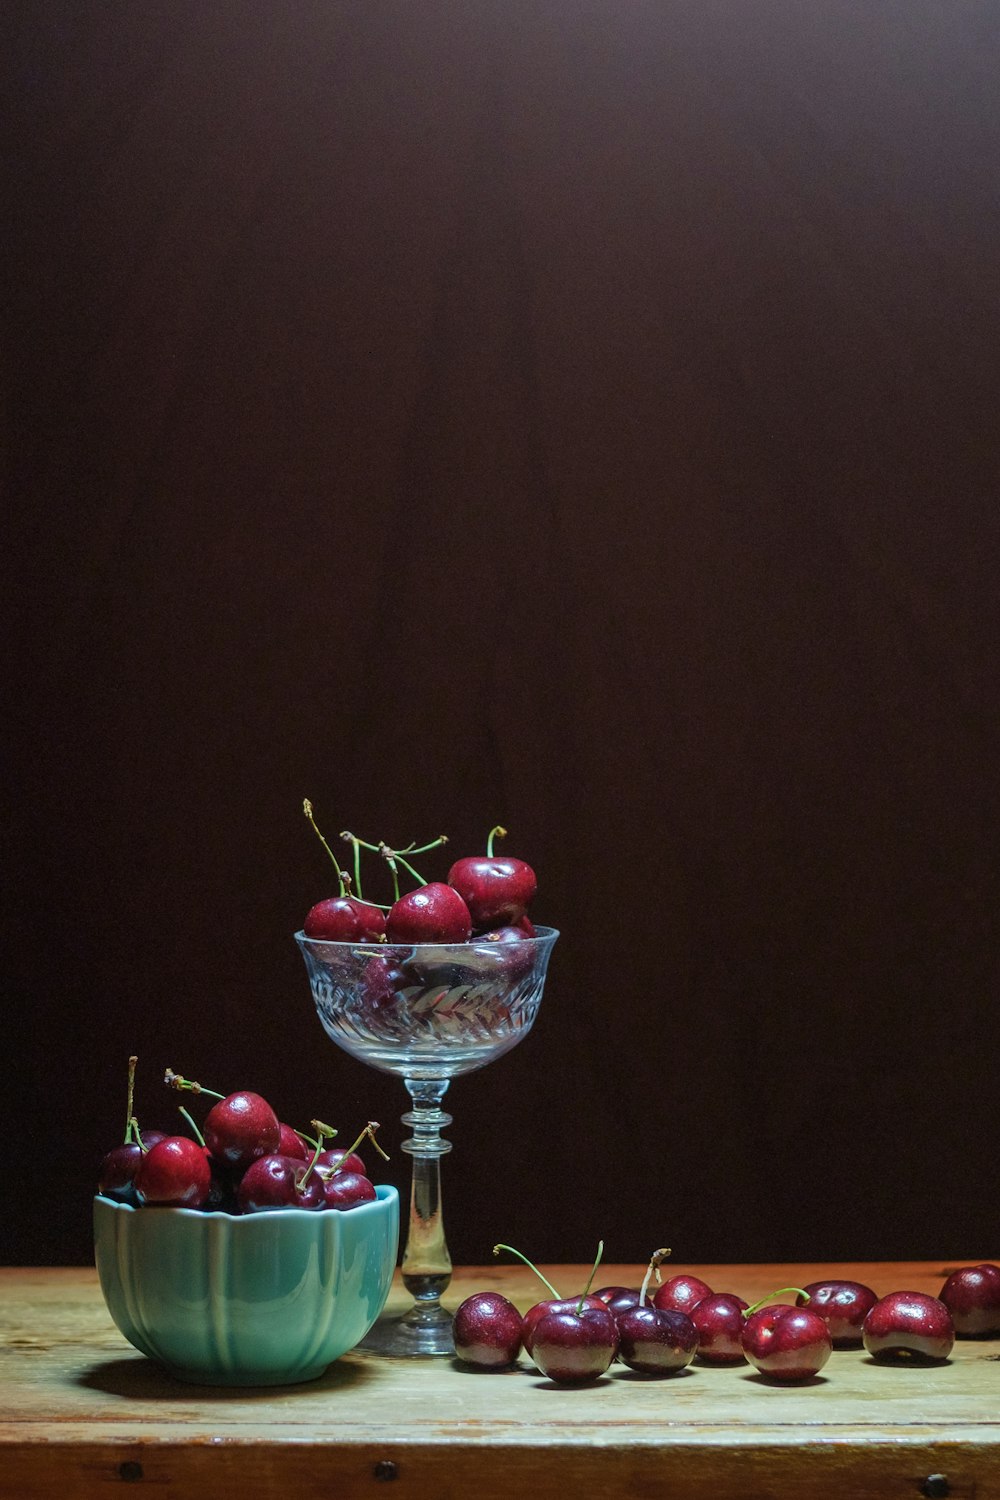 a table topped with a bowl of cherries next to a bowl of cherries